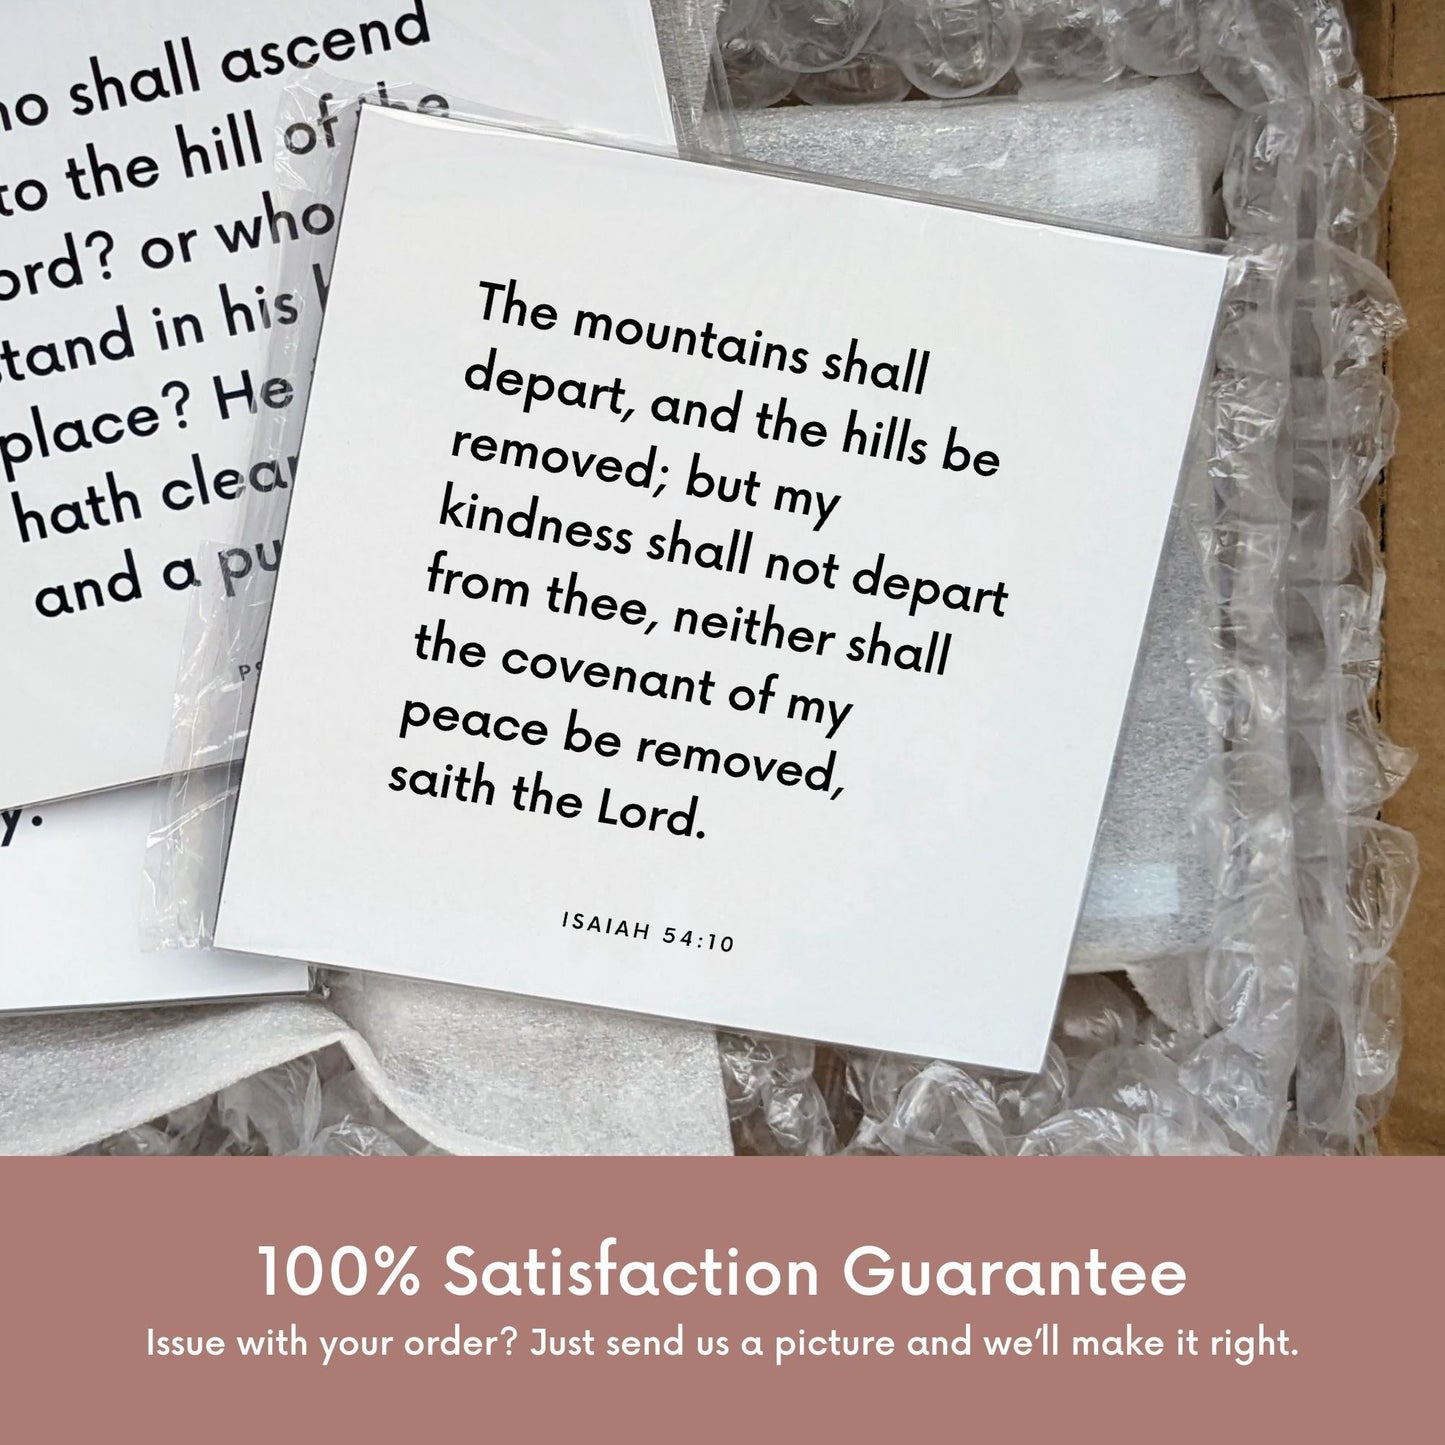 Shipping materials for scripture tile of Isaiah 54:10 - "My kindness shall not depart from thee"